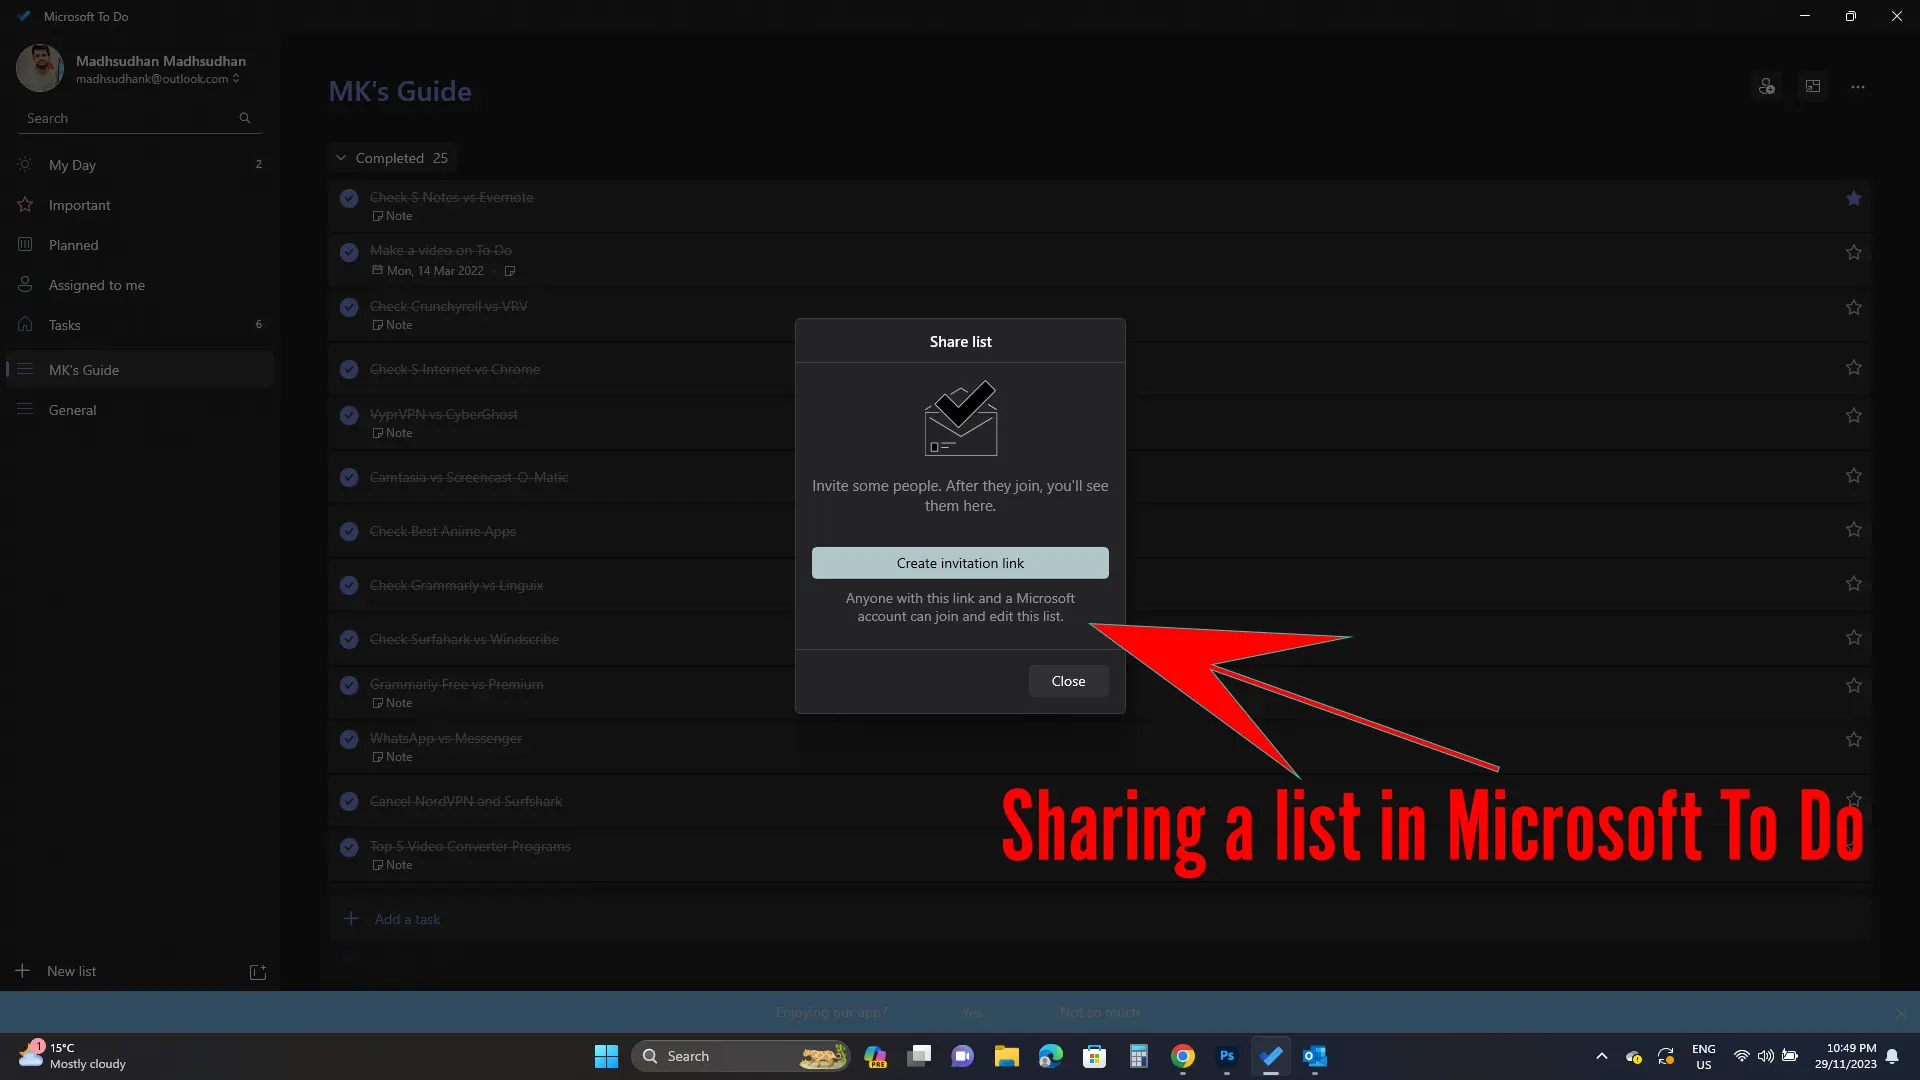 Sharing a list in Microsoft To Do